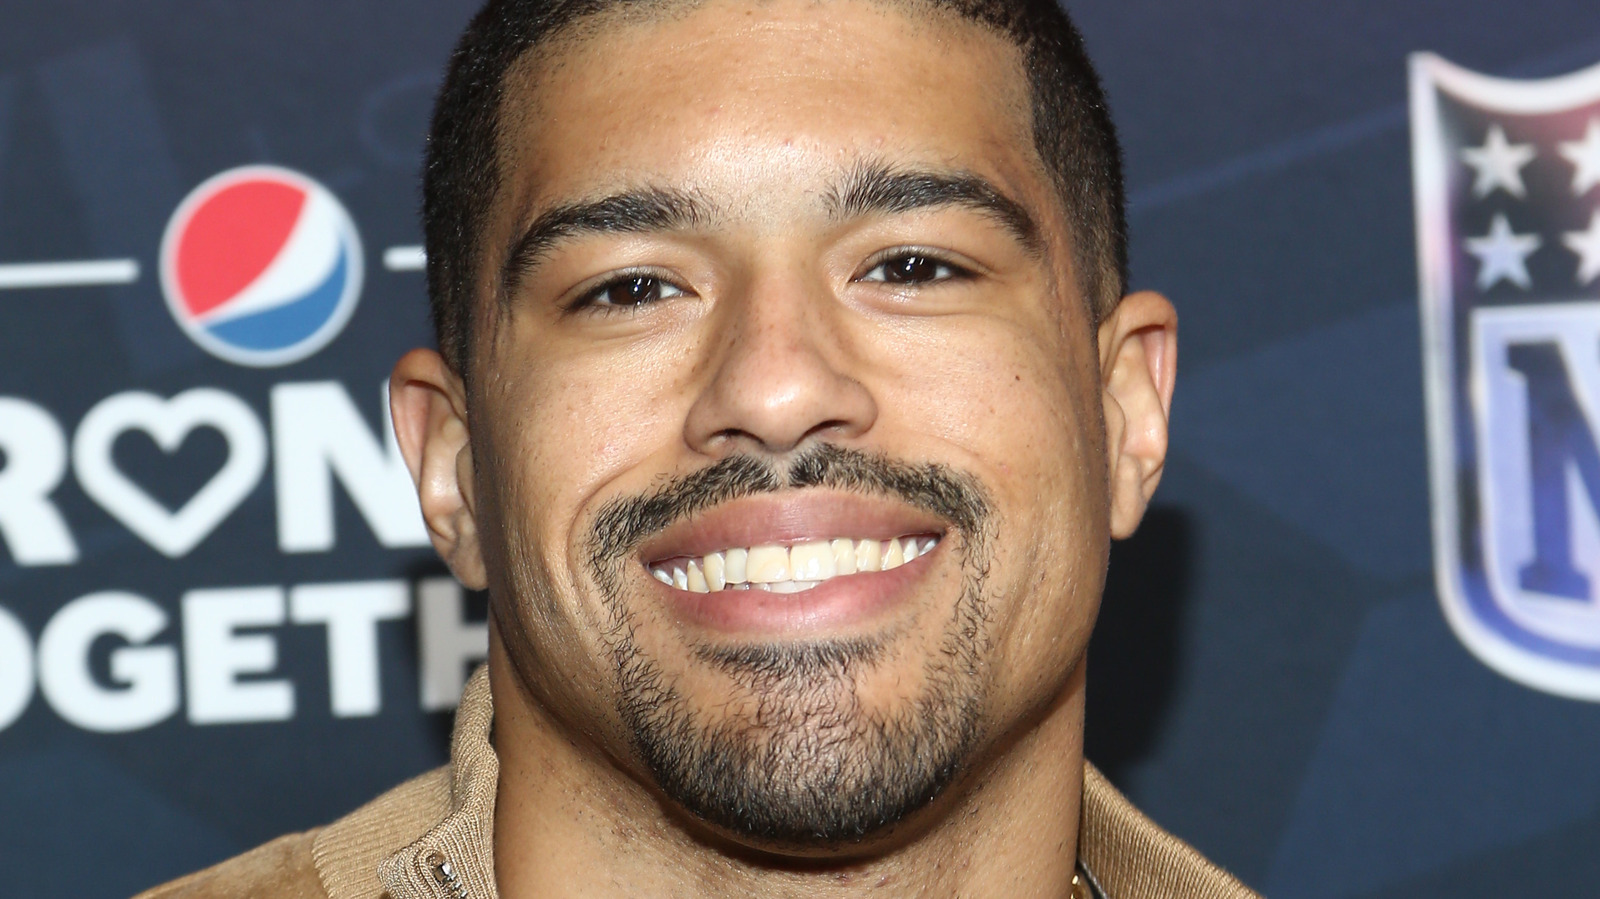 Anthony Bowens Didn't Like How WWE Handled Star's Coming Out